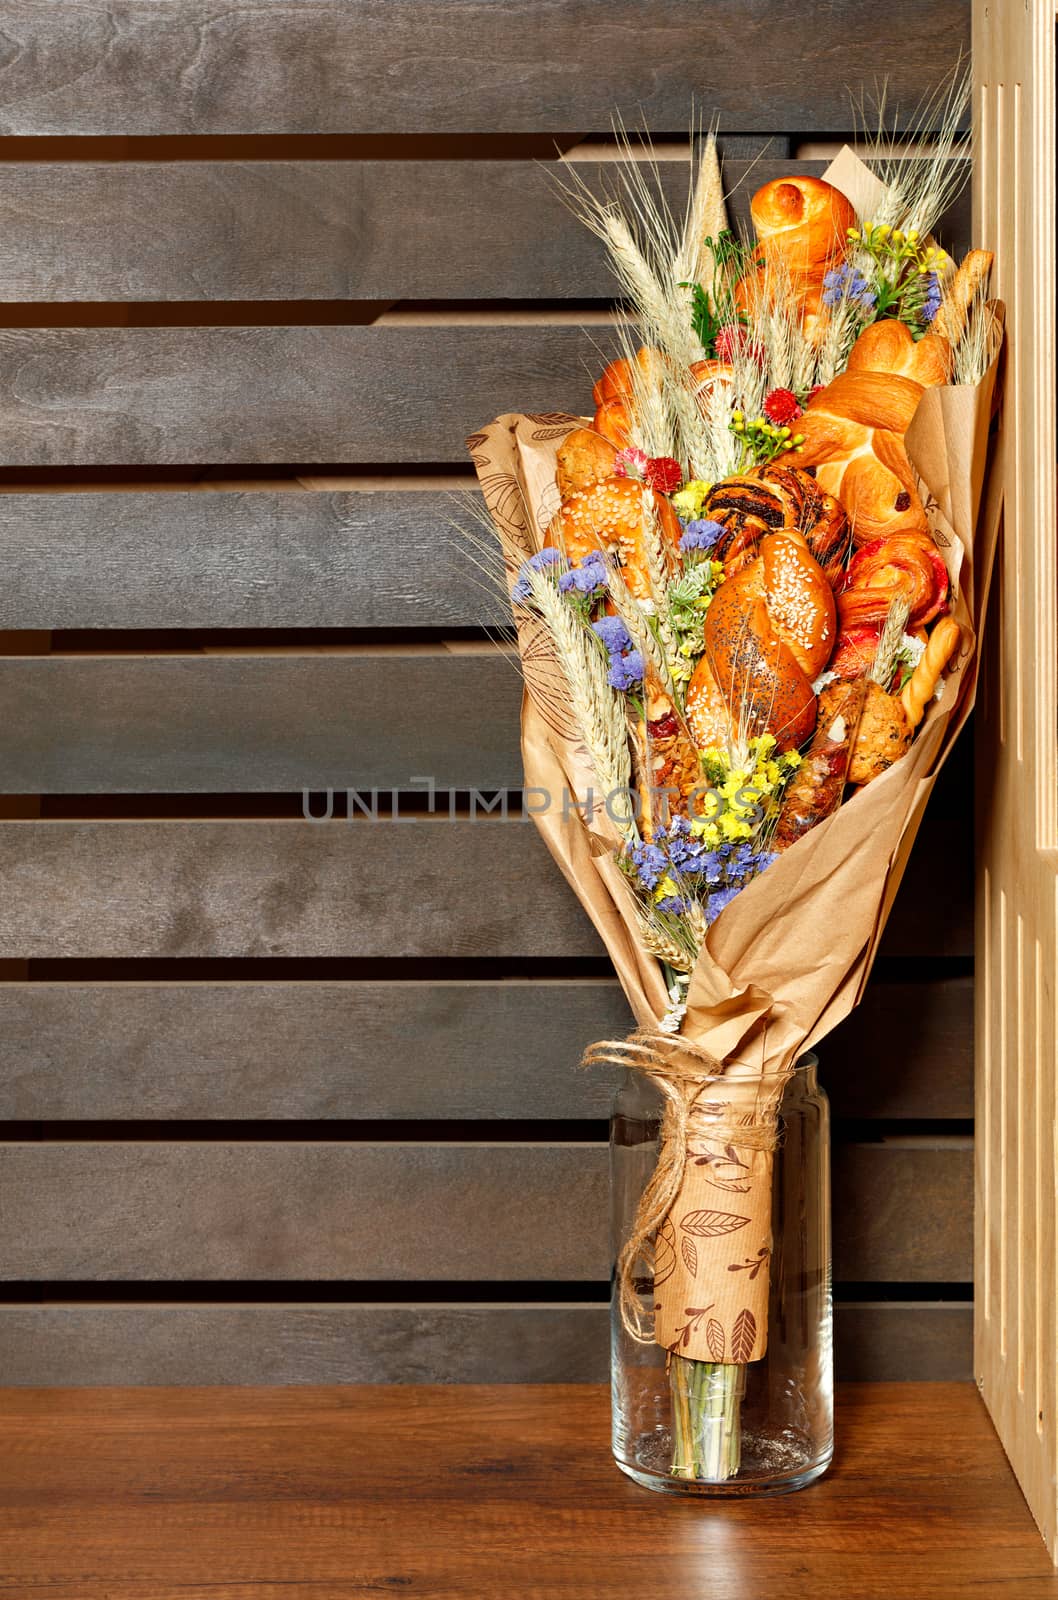 Fresh baked goods and bread, wheat ears and wildflowers are beautifully wrapped in a bouquet of craft paper, standing in a glass vase on a wooden striped brown background, copy space.